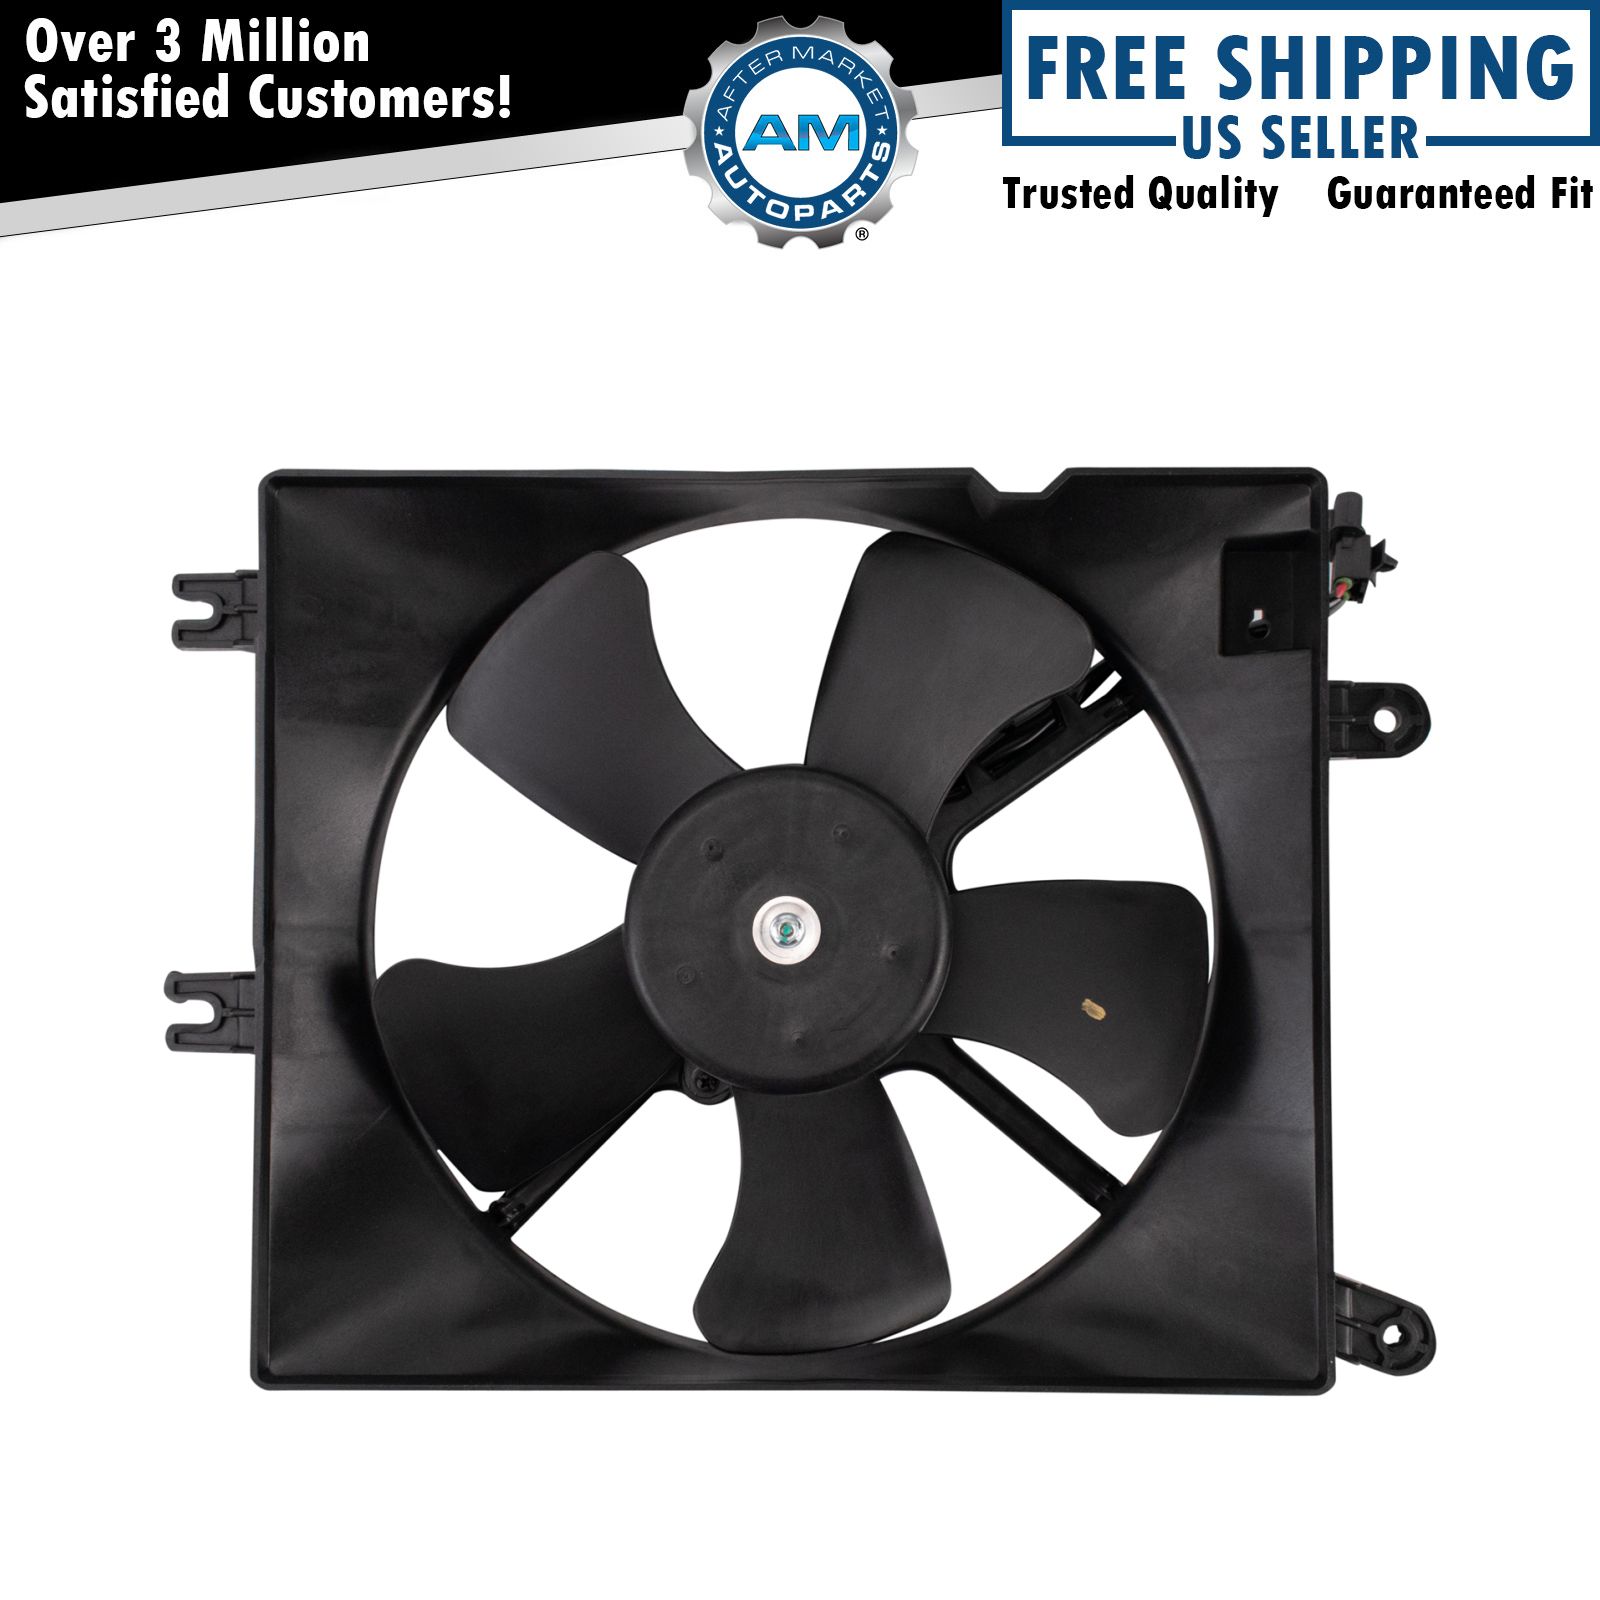 Right A/C Condenser Cooling Fan Assembly Fits 2004-2008 Suzuki Forenza Reno